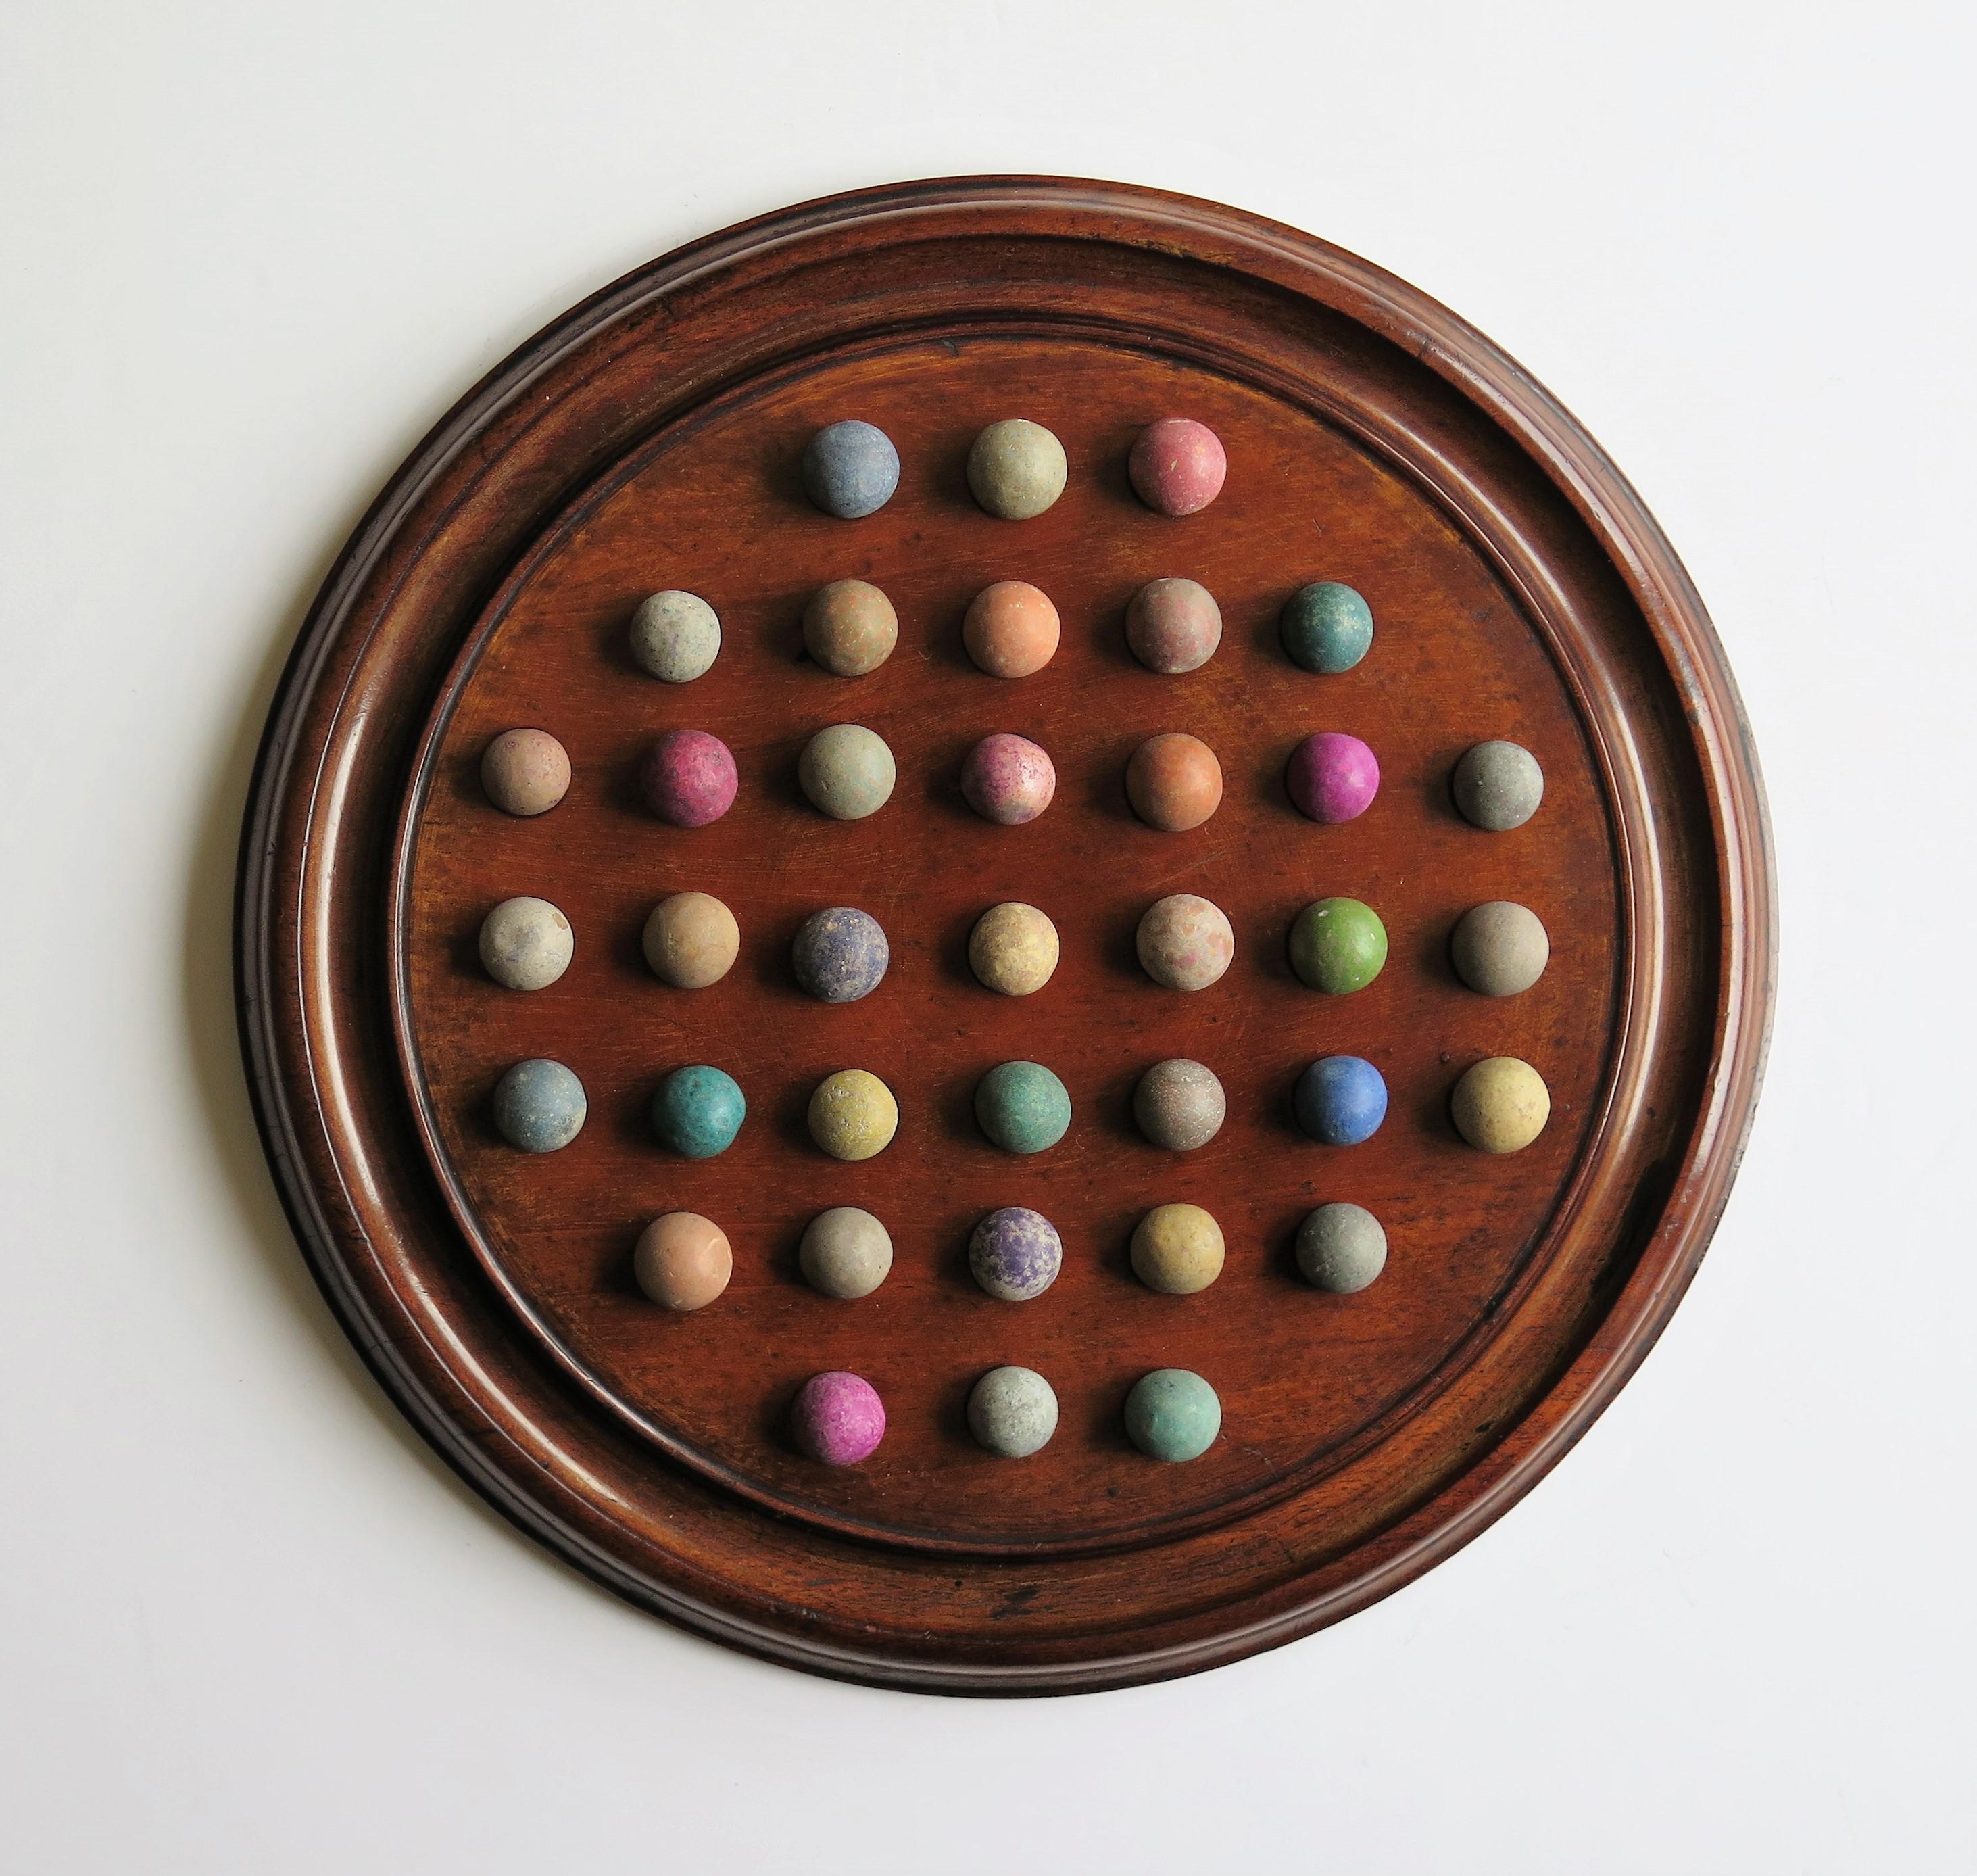 This is a complete Marble Solitaire game, having a beautiful Mahogany board and a complete set of 37 clay or stone handmade marbles, all dating to the mid-19th century Victorian period.
 
This board is a really good example. It is circular and